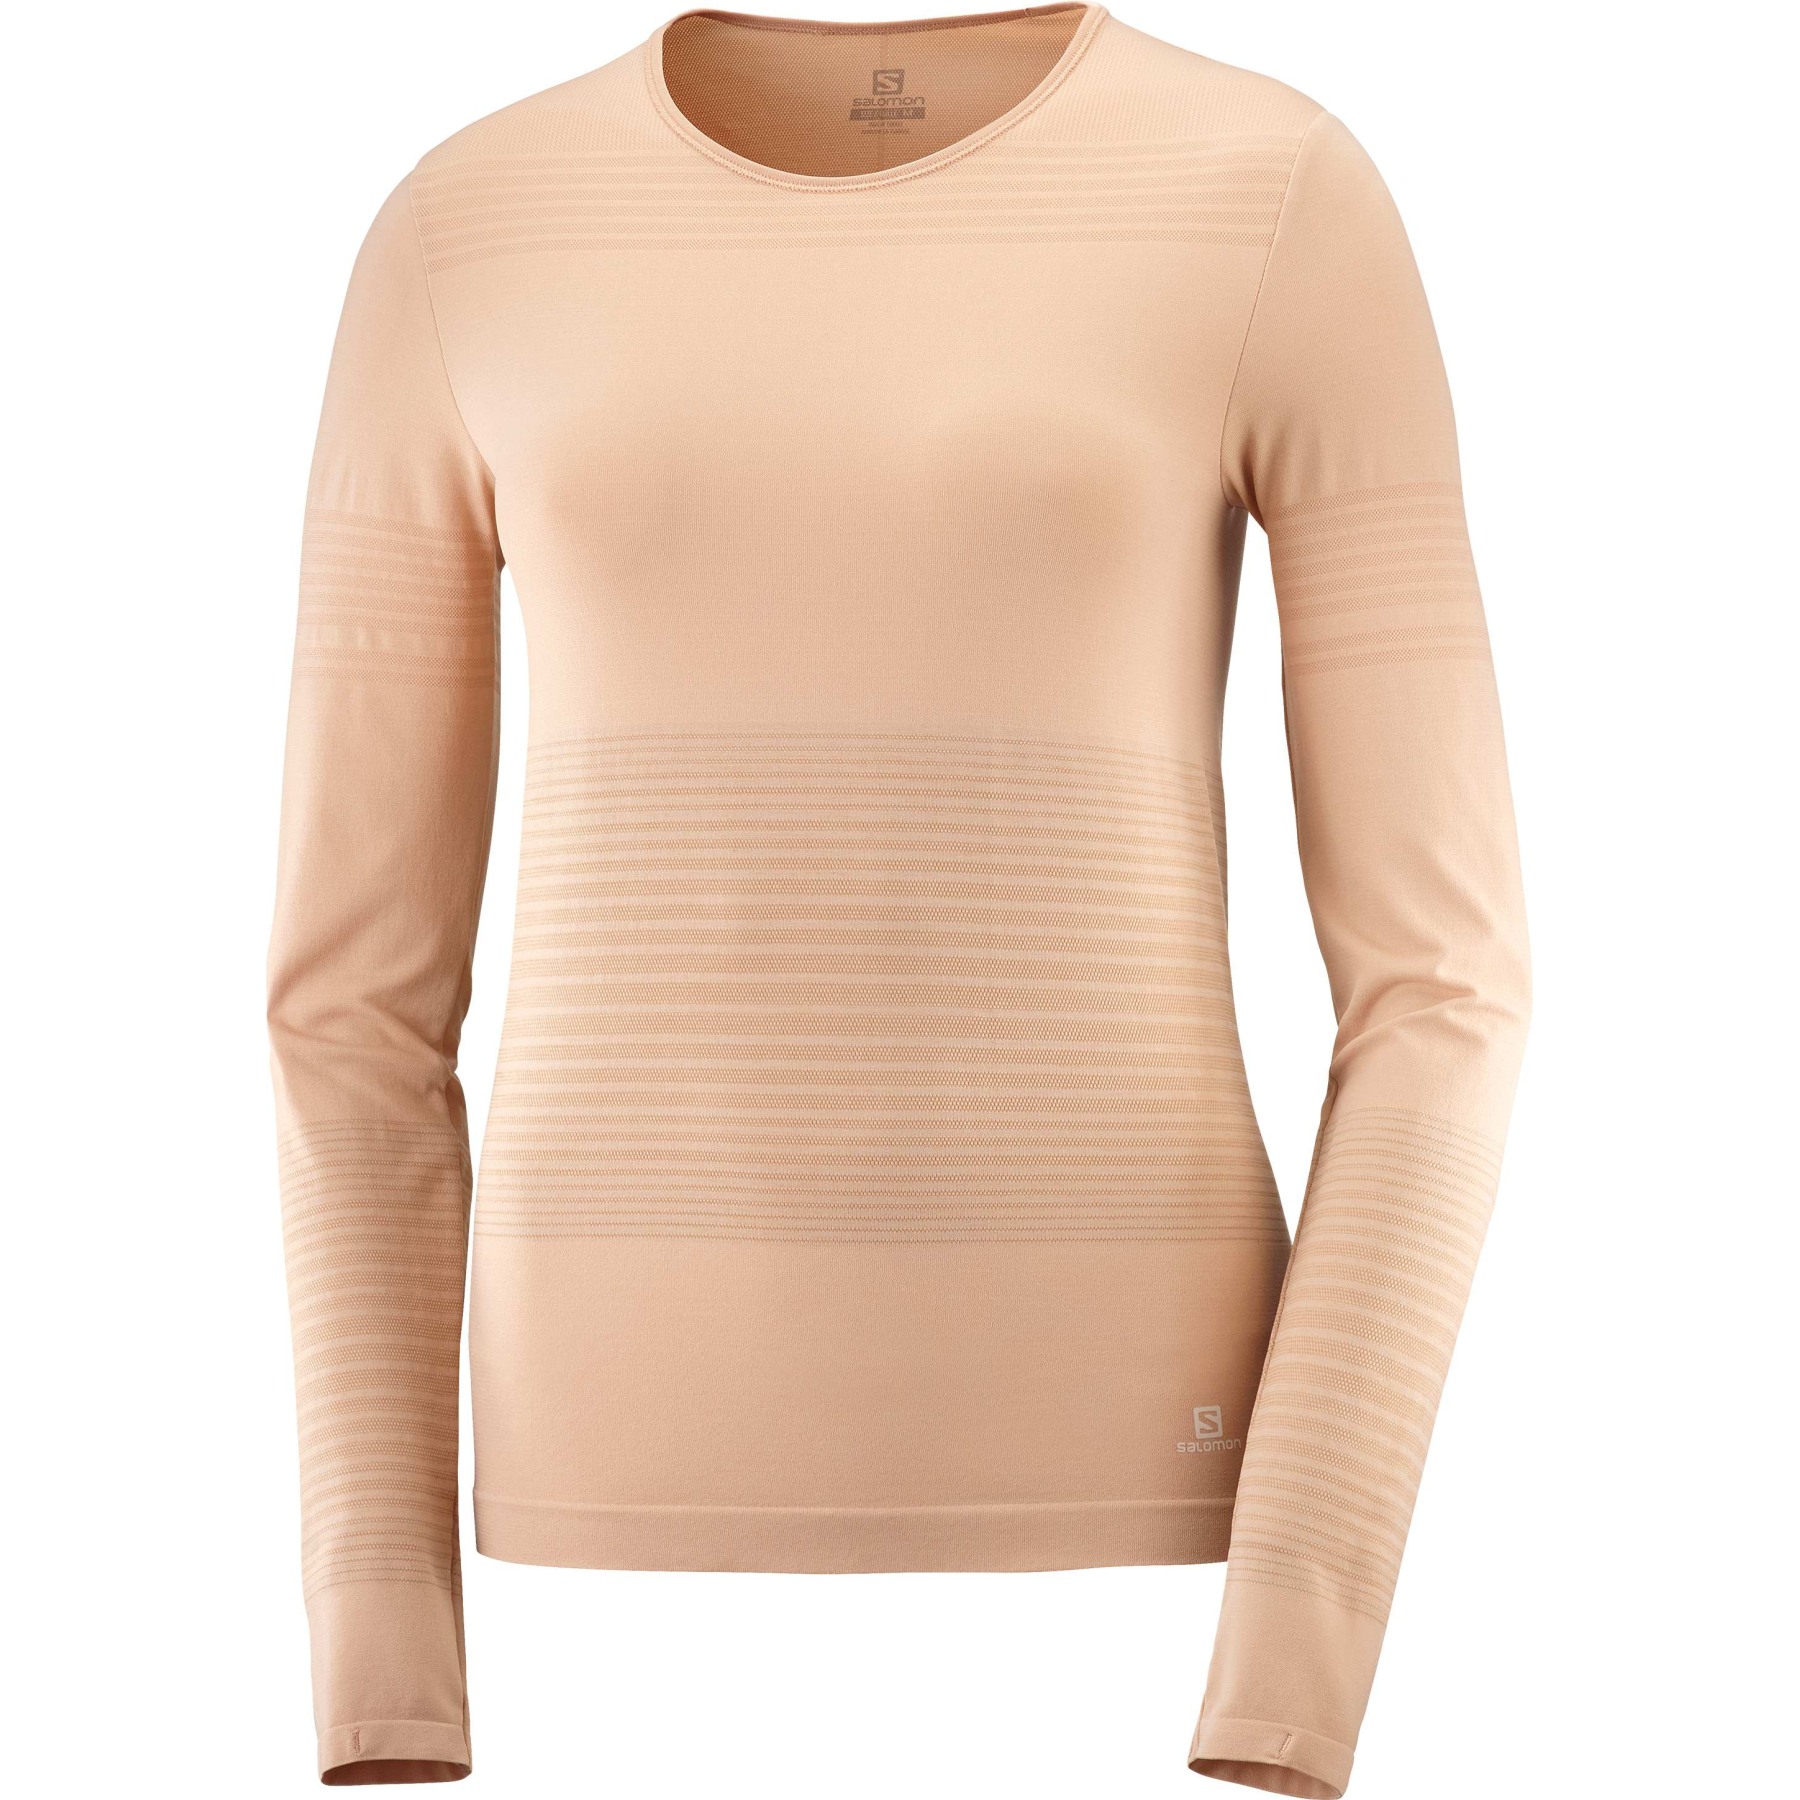 Picture of Salomon Elevate Move On Longsleeve Shirt Women - sirocco